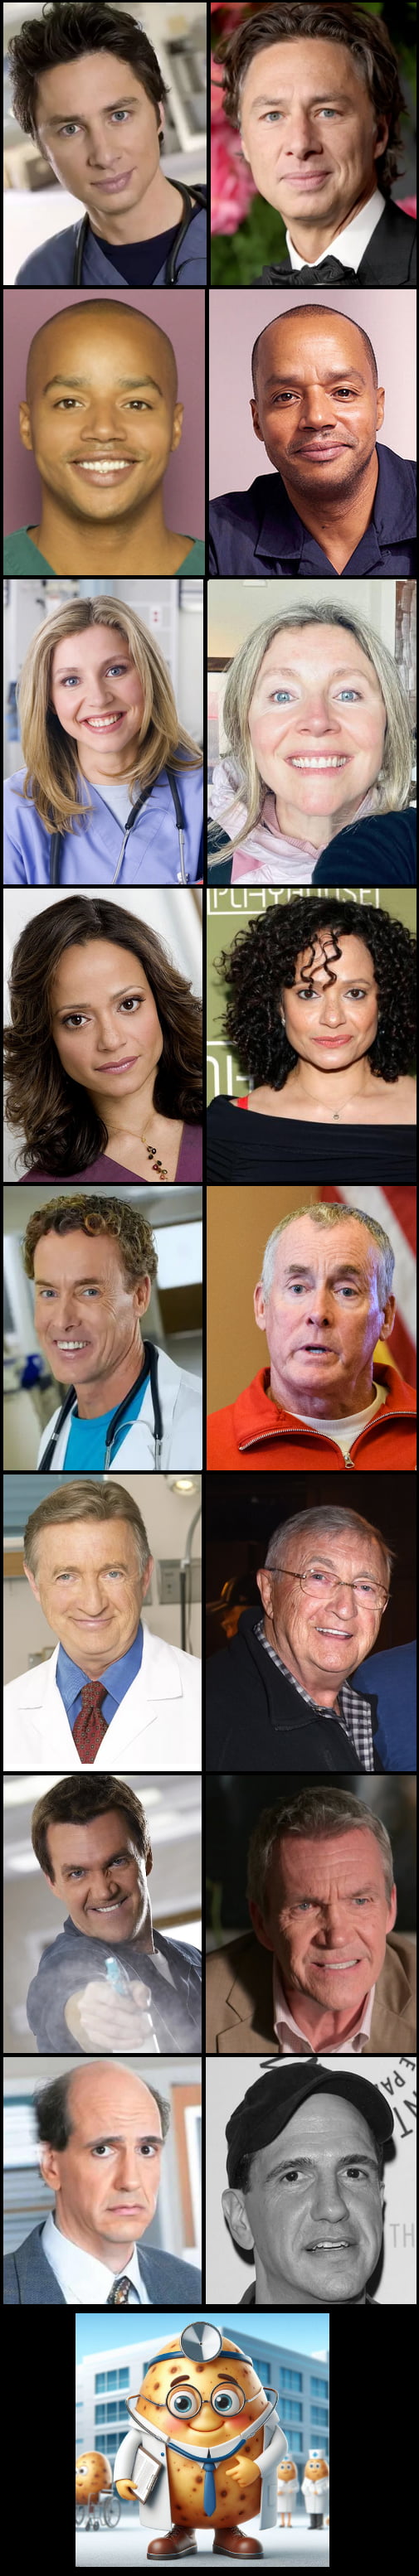 Scrubs cast then and now 2023 Image